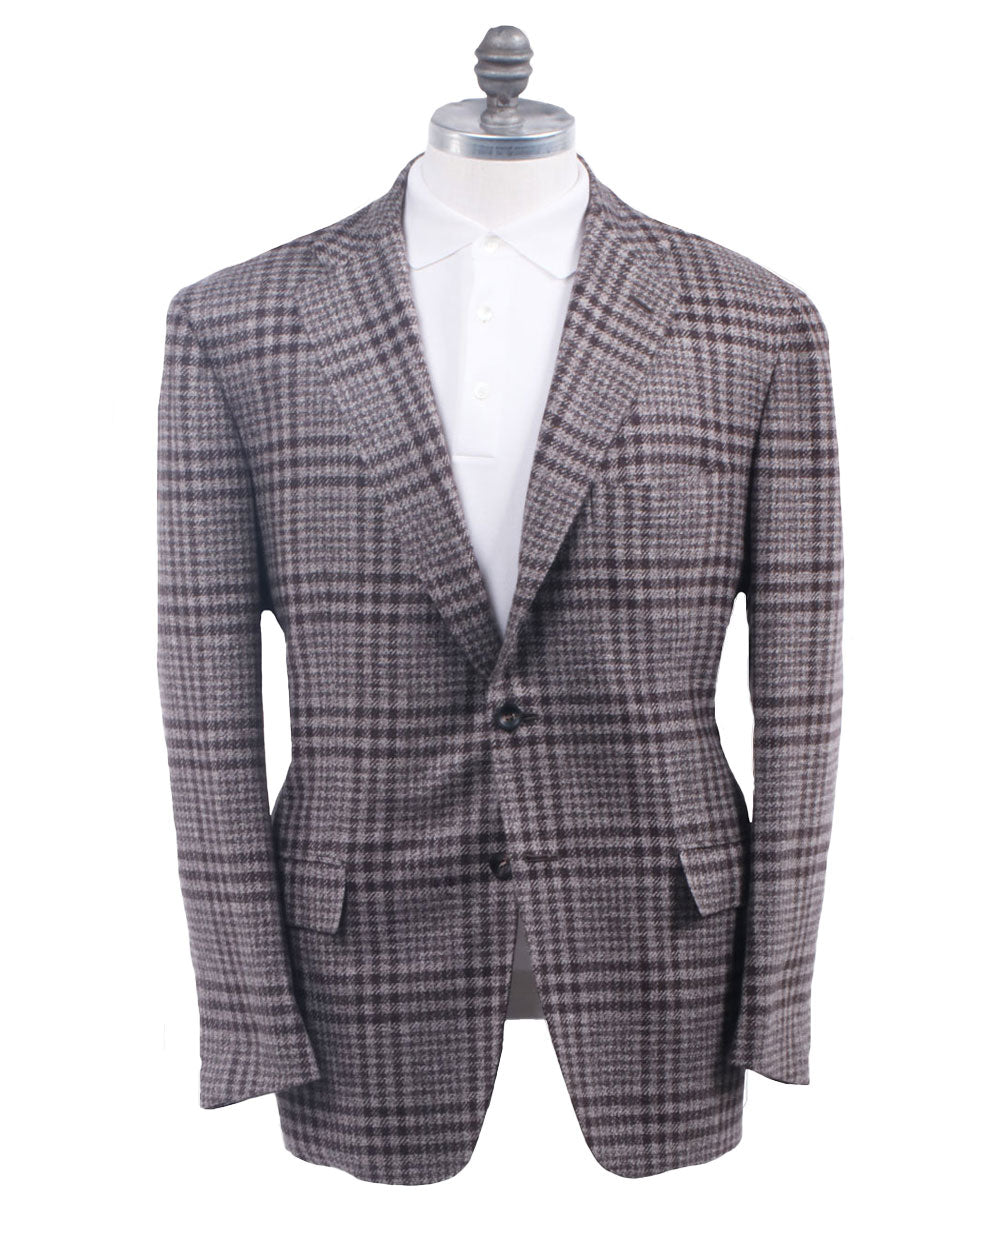 Brown and Tan Glen Plaid Sportcoat